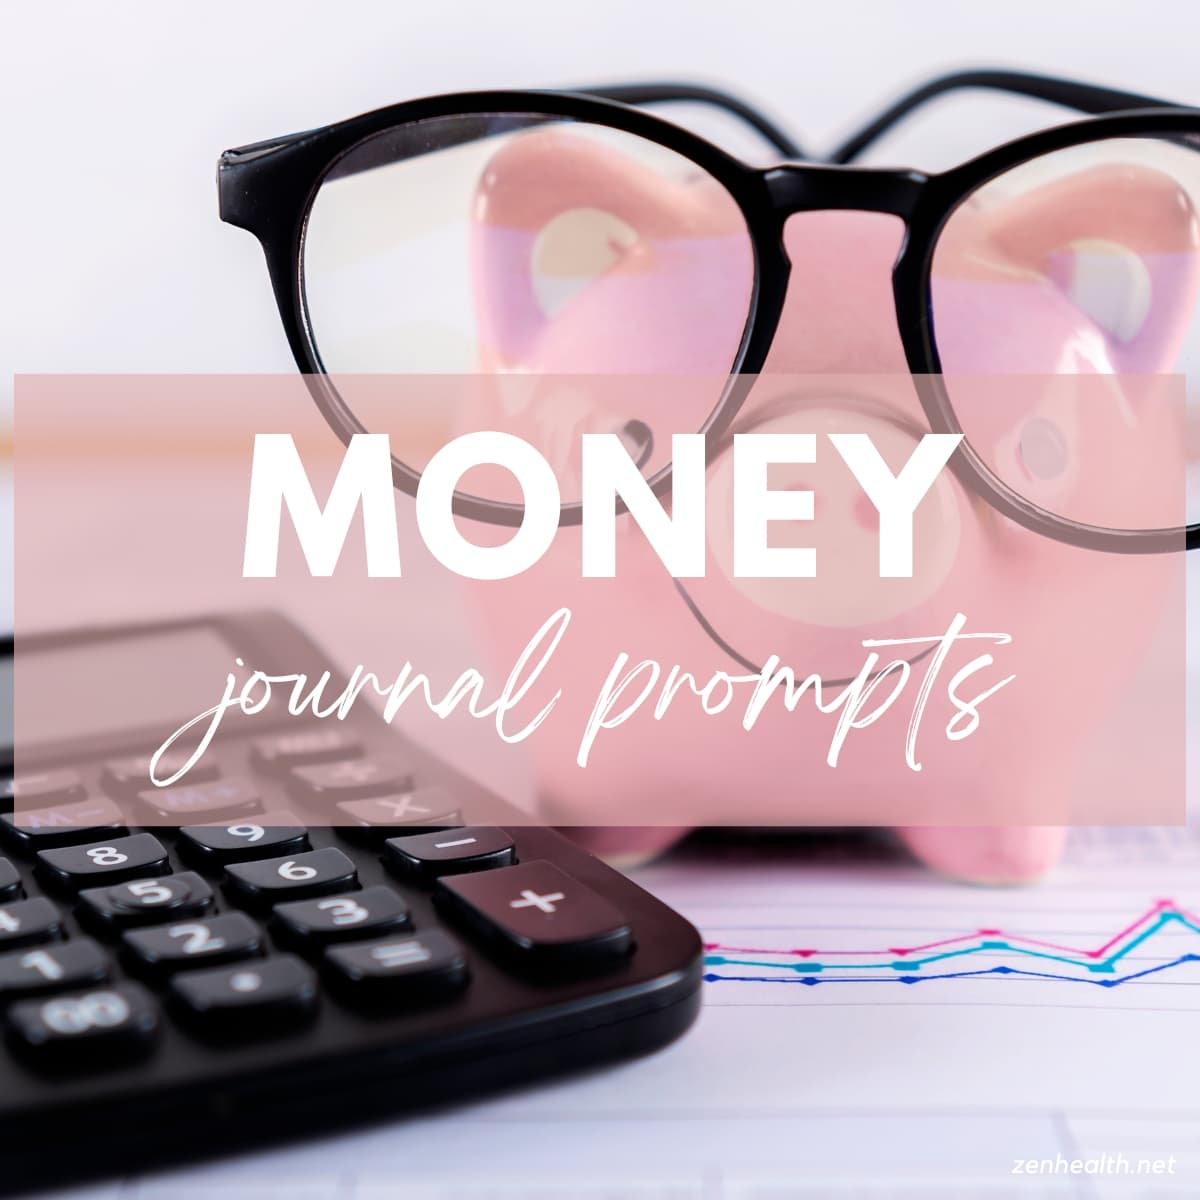 money journal prompts text overlay on a photo of a pink piggybank with black spectacles, calculator, and graph